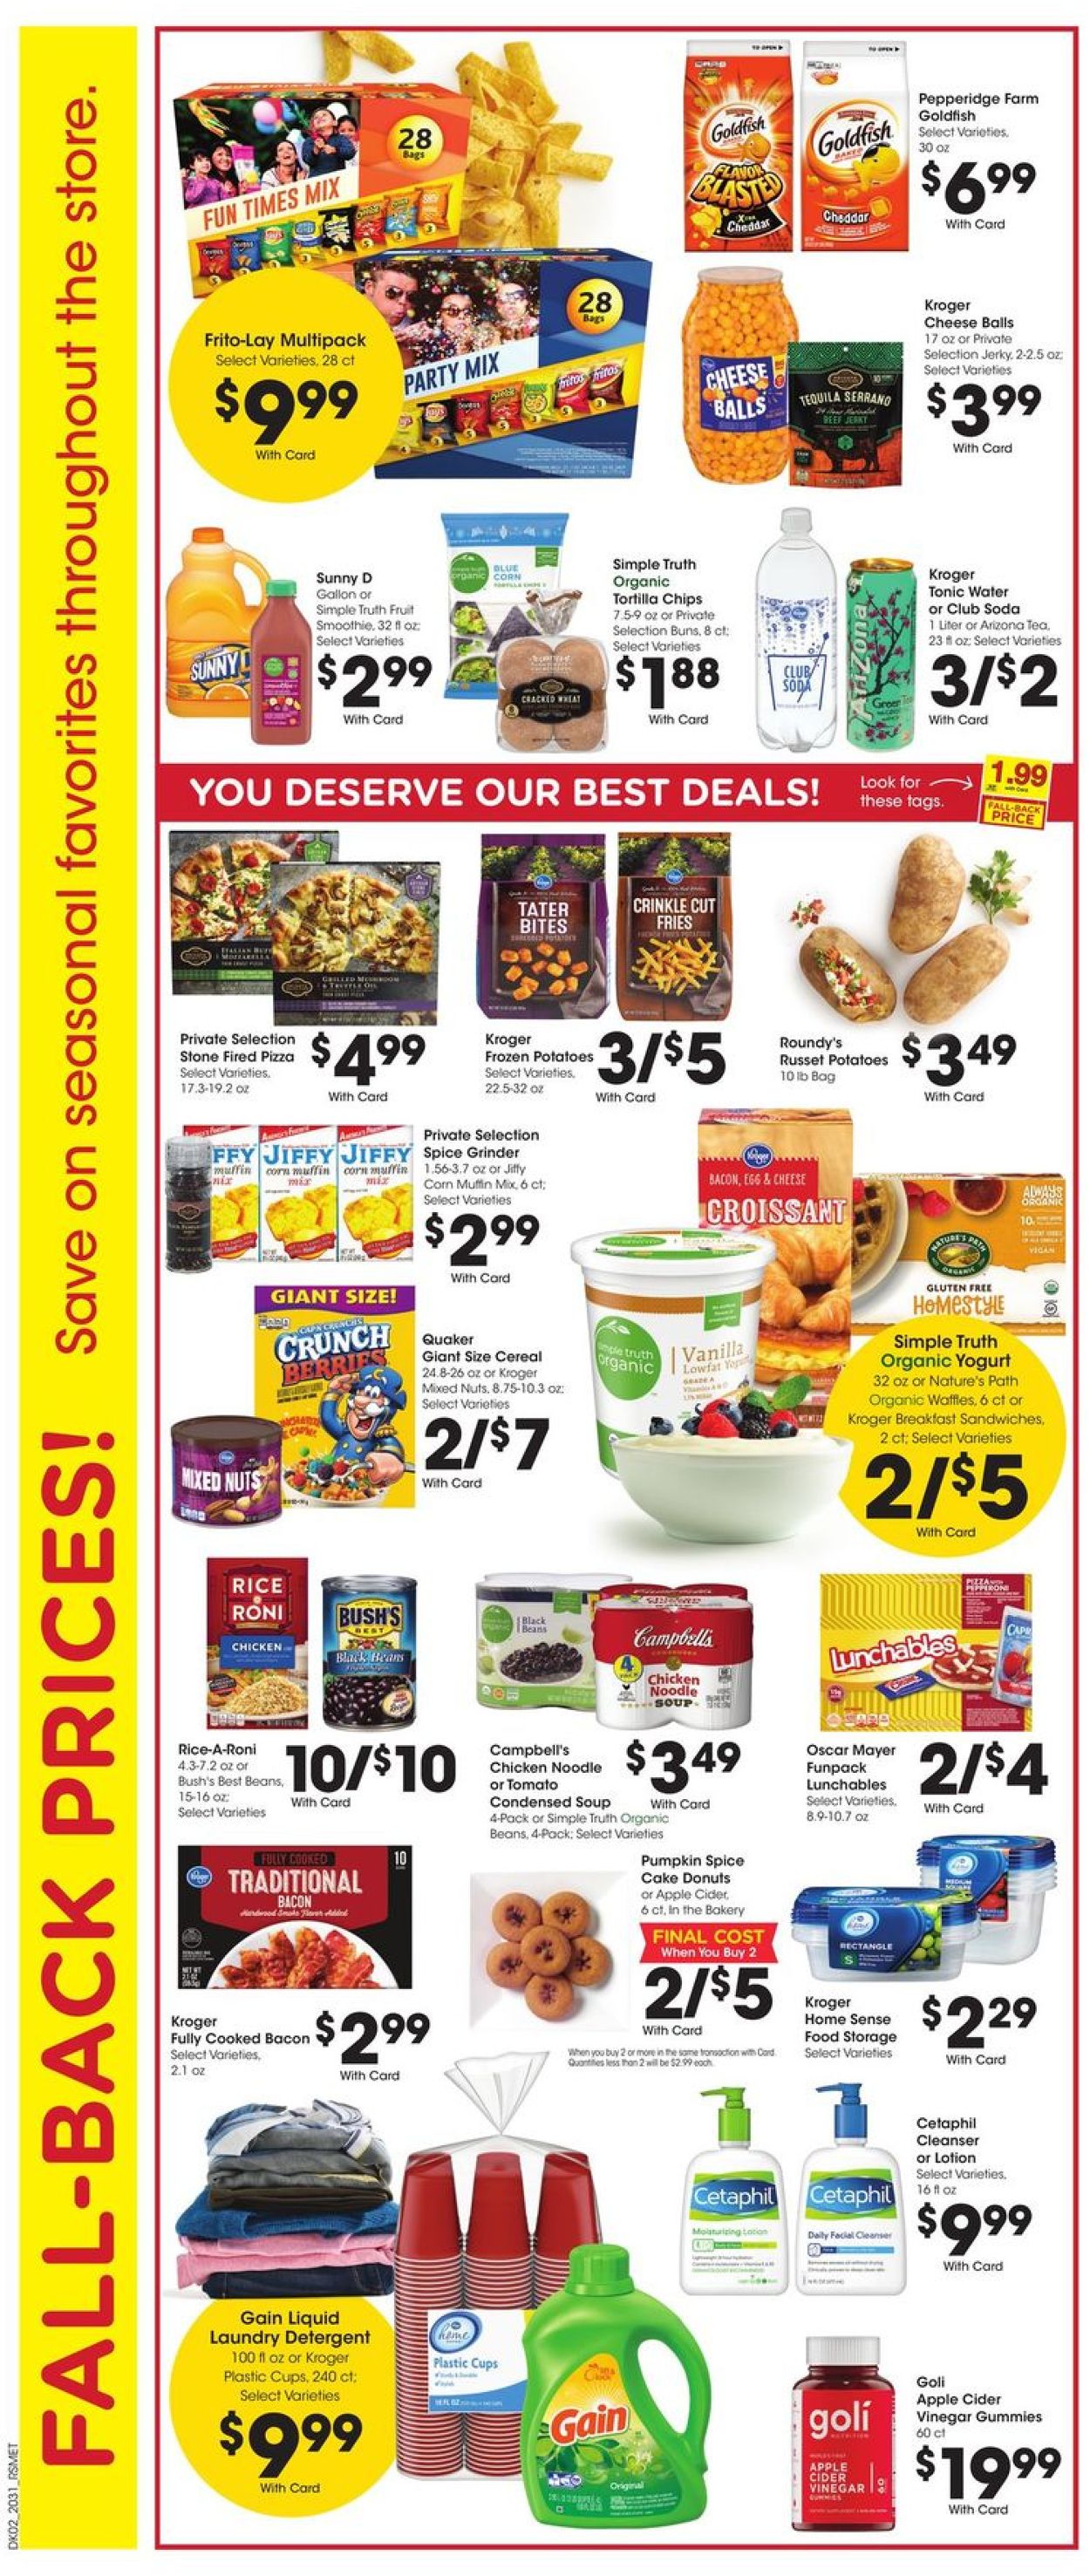 Pick ‘n Save Ad from 09/02/2020